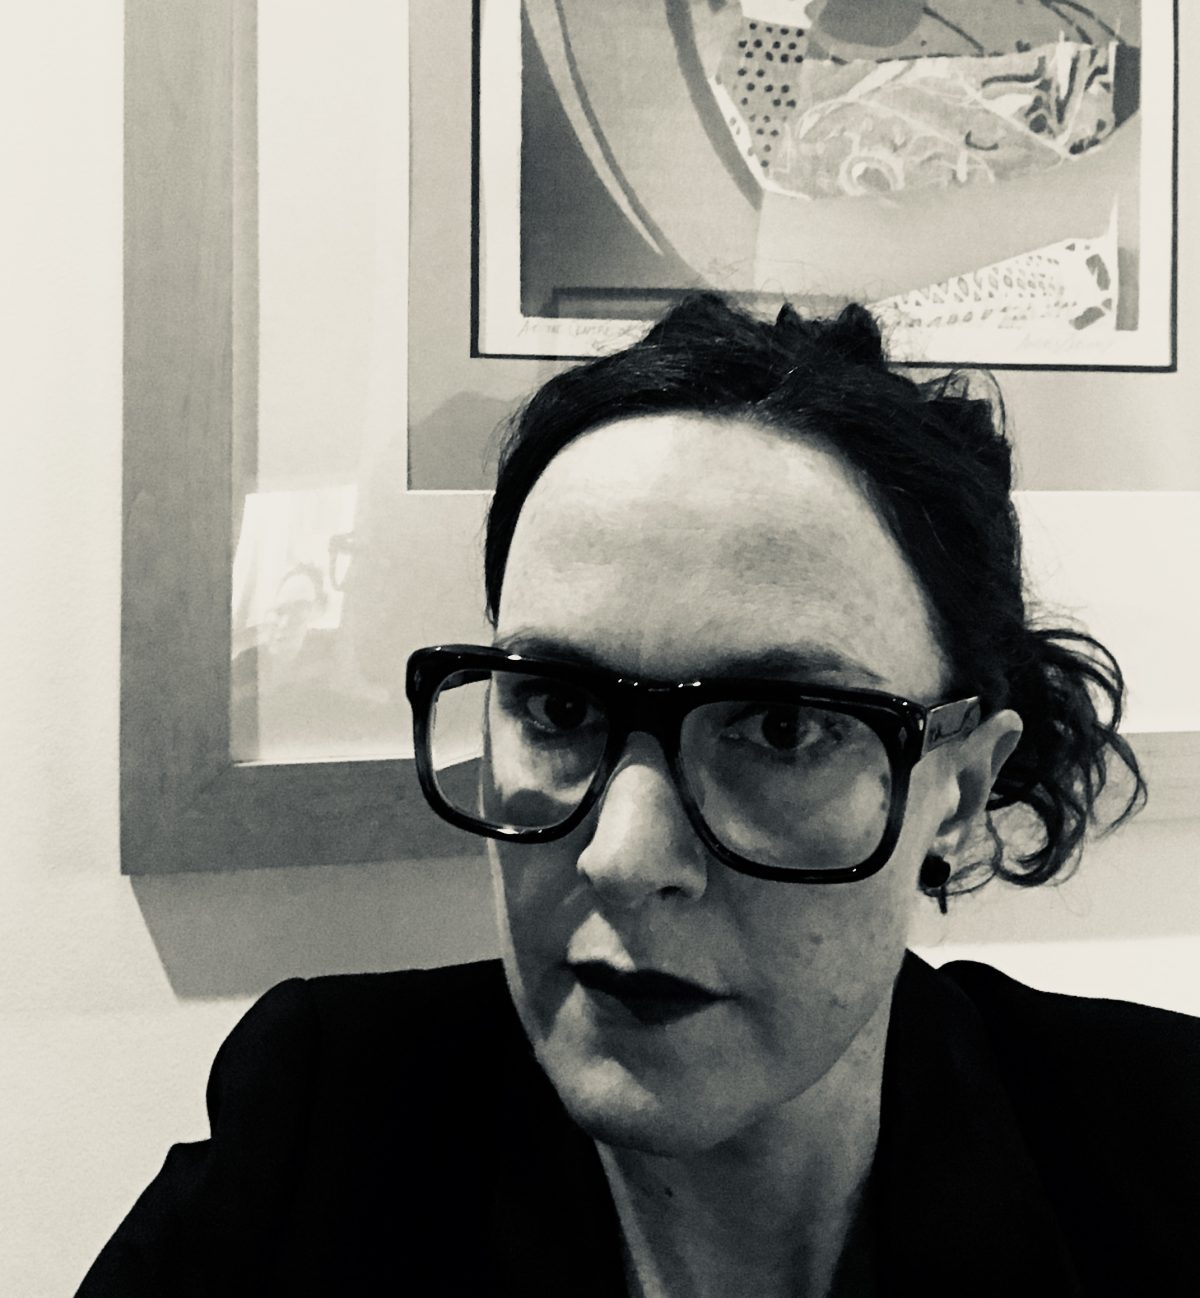 Black & white image of T.L. Cowan. Image shows a white femme wearing dark, thick-rimmed eyeglasses, brown curly hair pulled back into a lose bun; she sports dramatic dark red lipstick. She is wearing a black blazer. The background of the image is the bottom corner of a framed print by Andréa Zarwiny. T.L.'s reflection is mirrored in the glass of the picture.